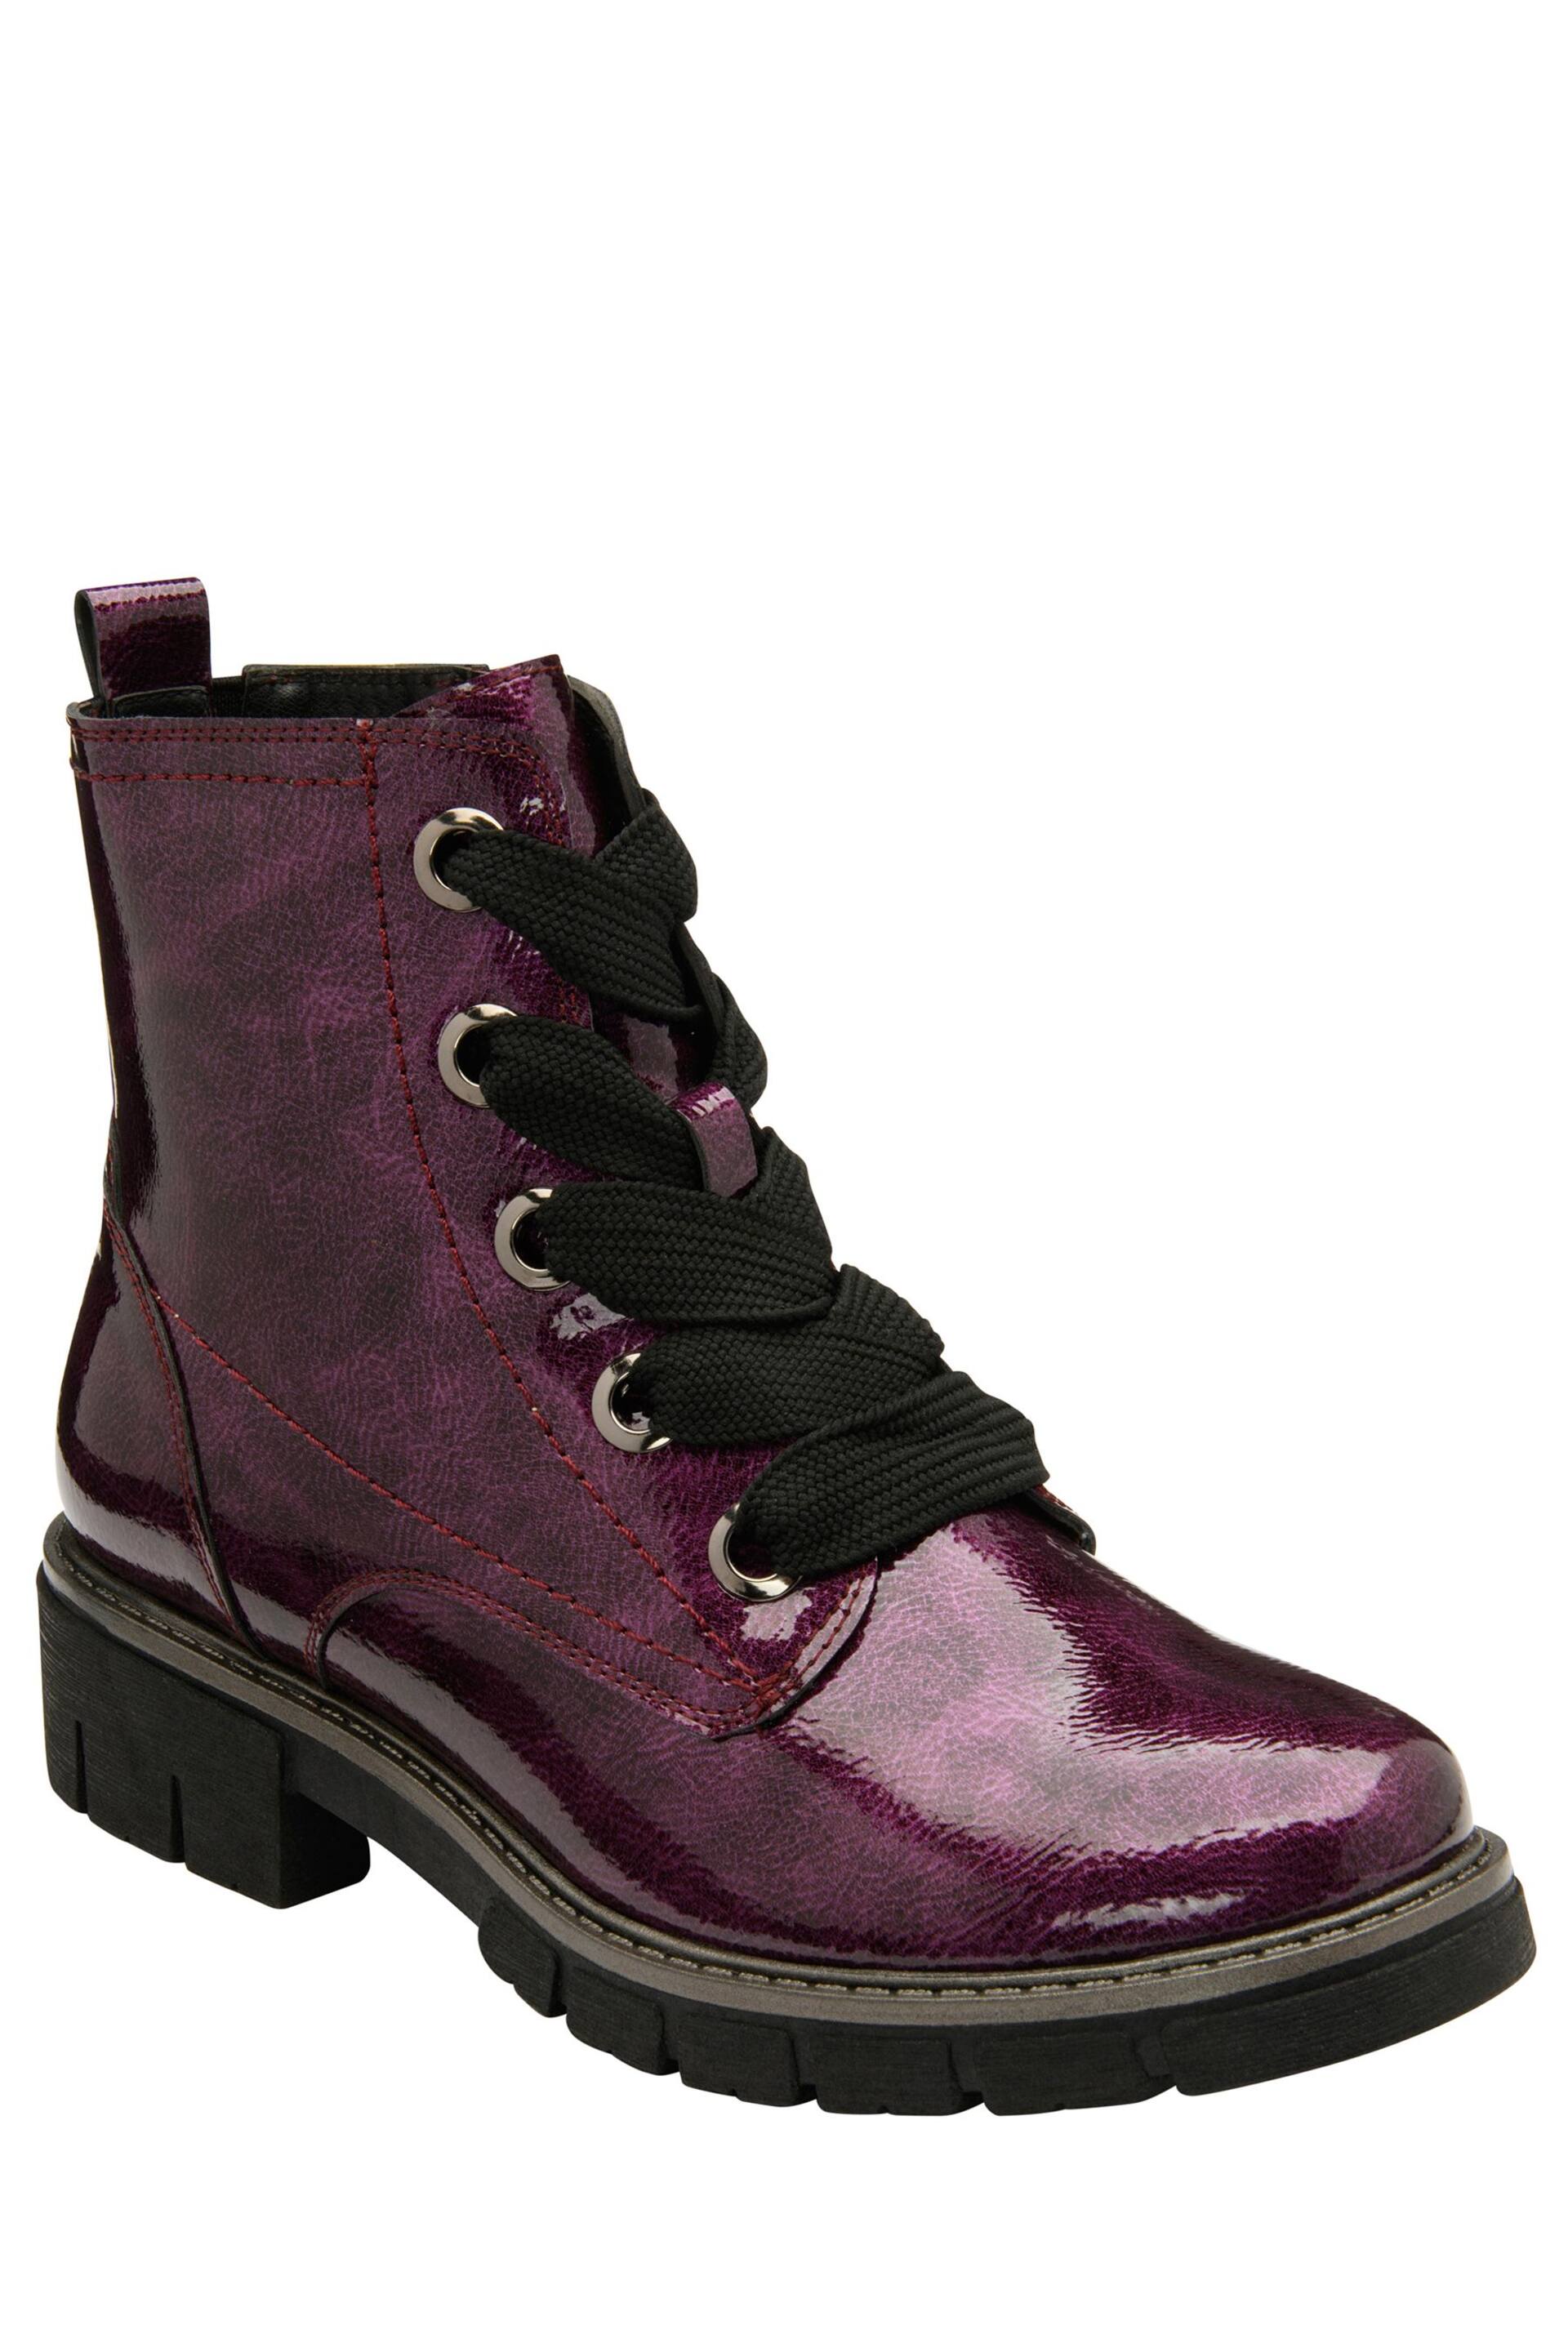 Lotus Purple Patent Lace-Up Ankle Boots - Image 1 of 4